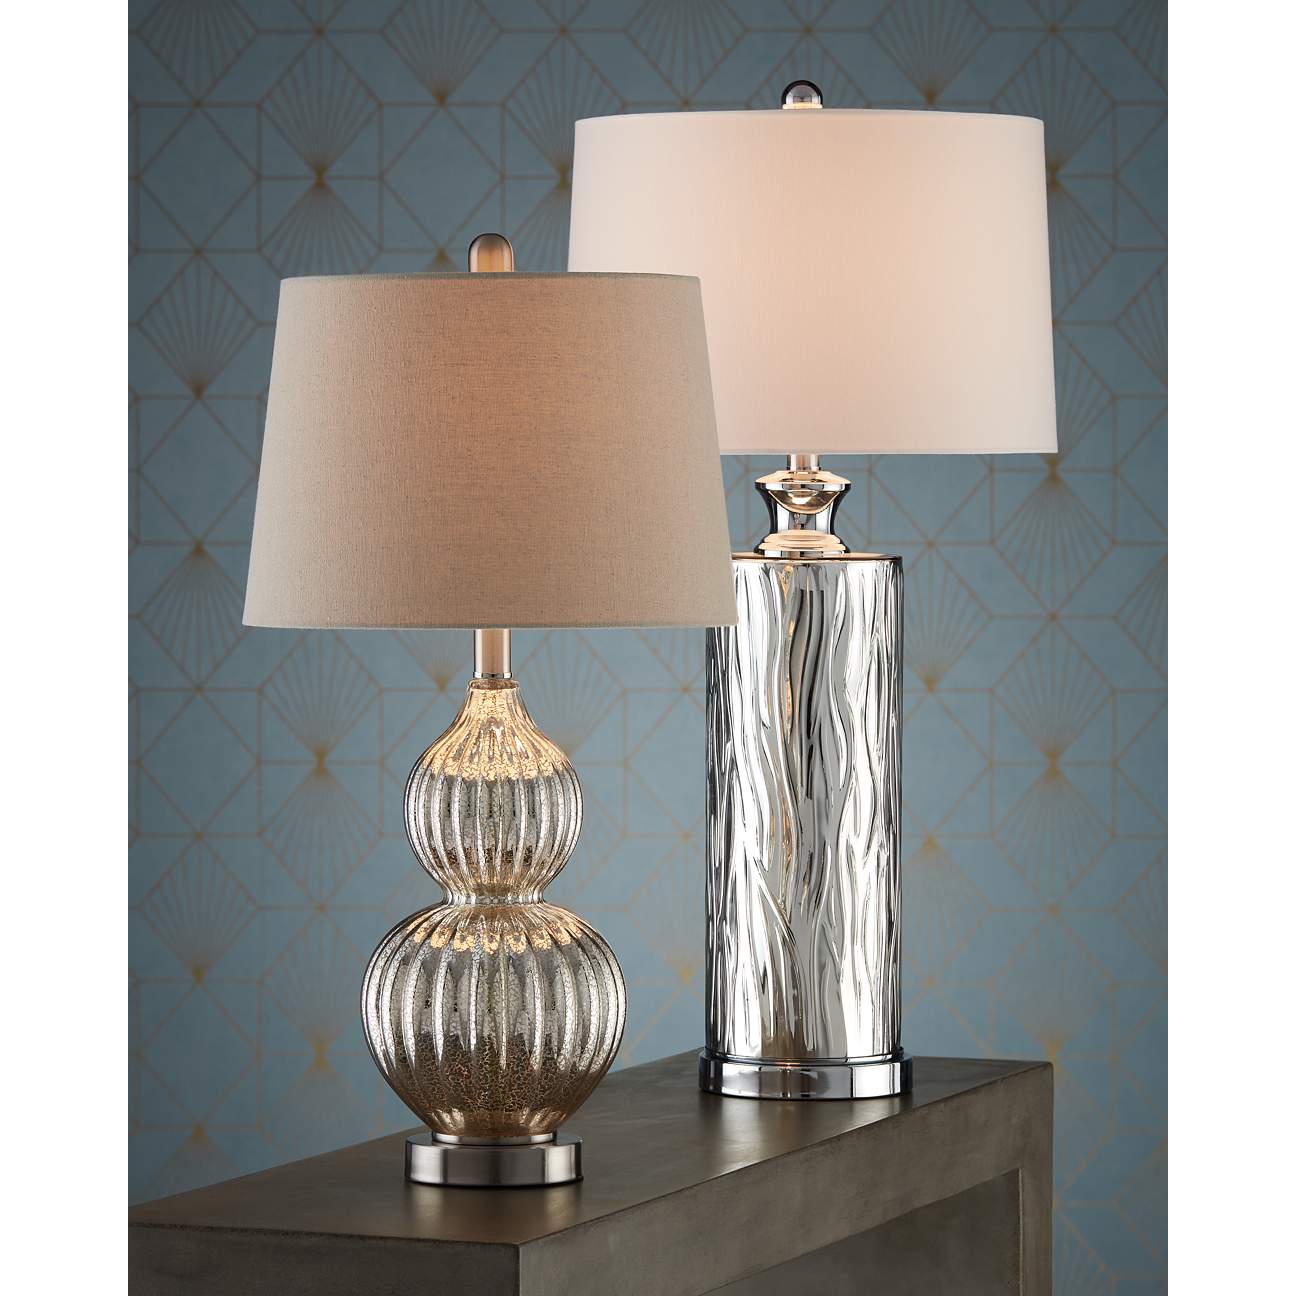 Lili Fluted Mercury Glass Table Lamp - #8H816 | Lamps Plus